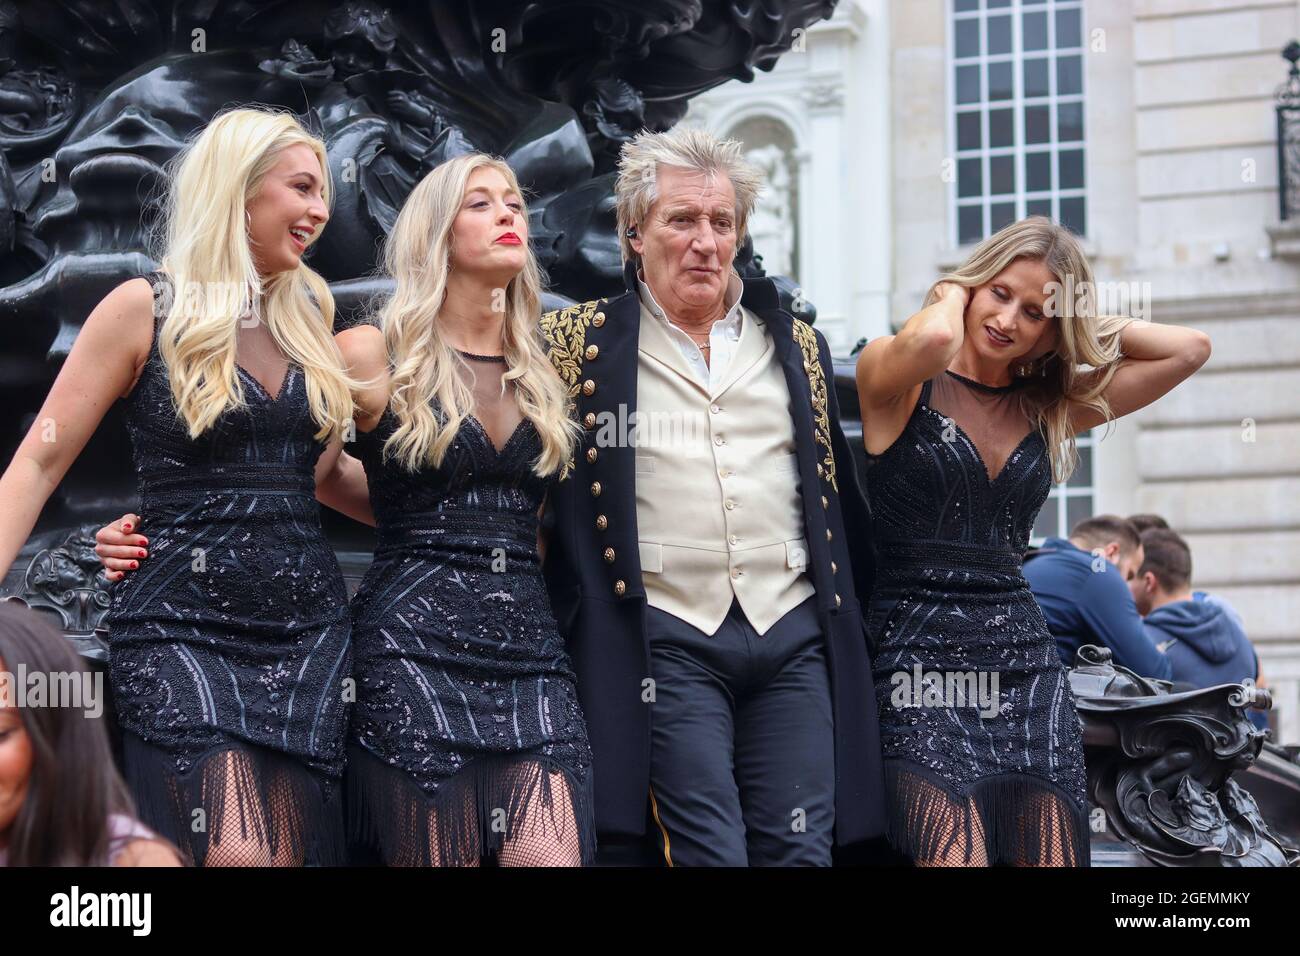 London, UK. 20th Aug, 2021.  Musician Rod Stewart films music video on the Shaftesbury Memorial Fountain 'Eros' Statue in Piccadilly Circus Credit: Lucy North/Alamy Live News Stock Photo